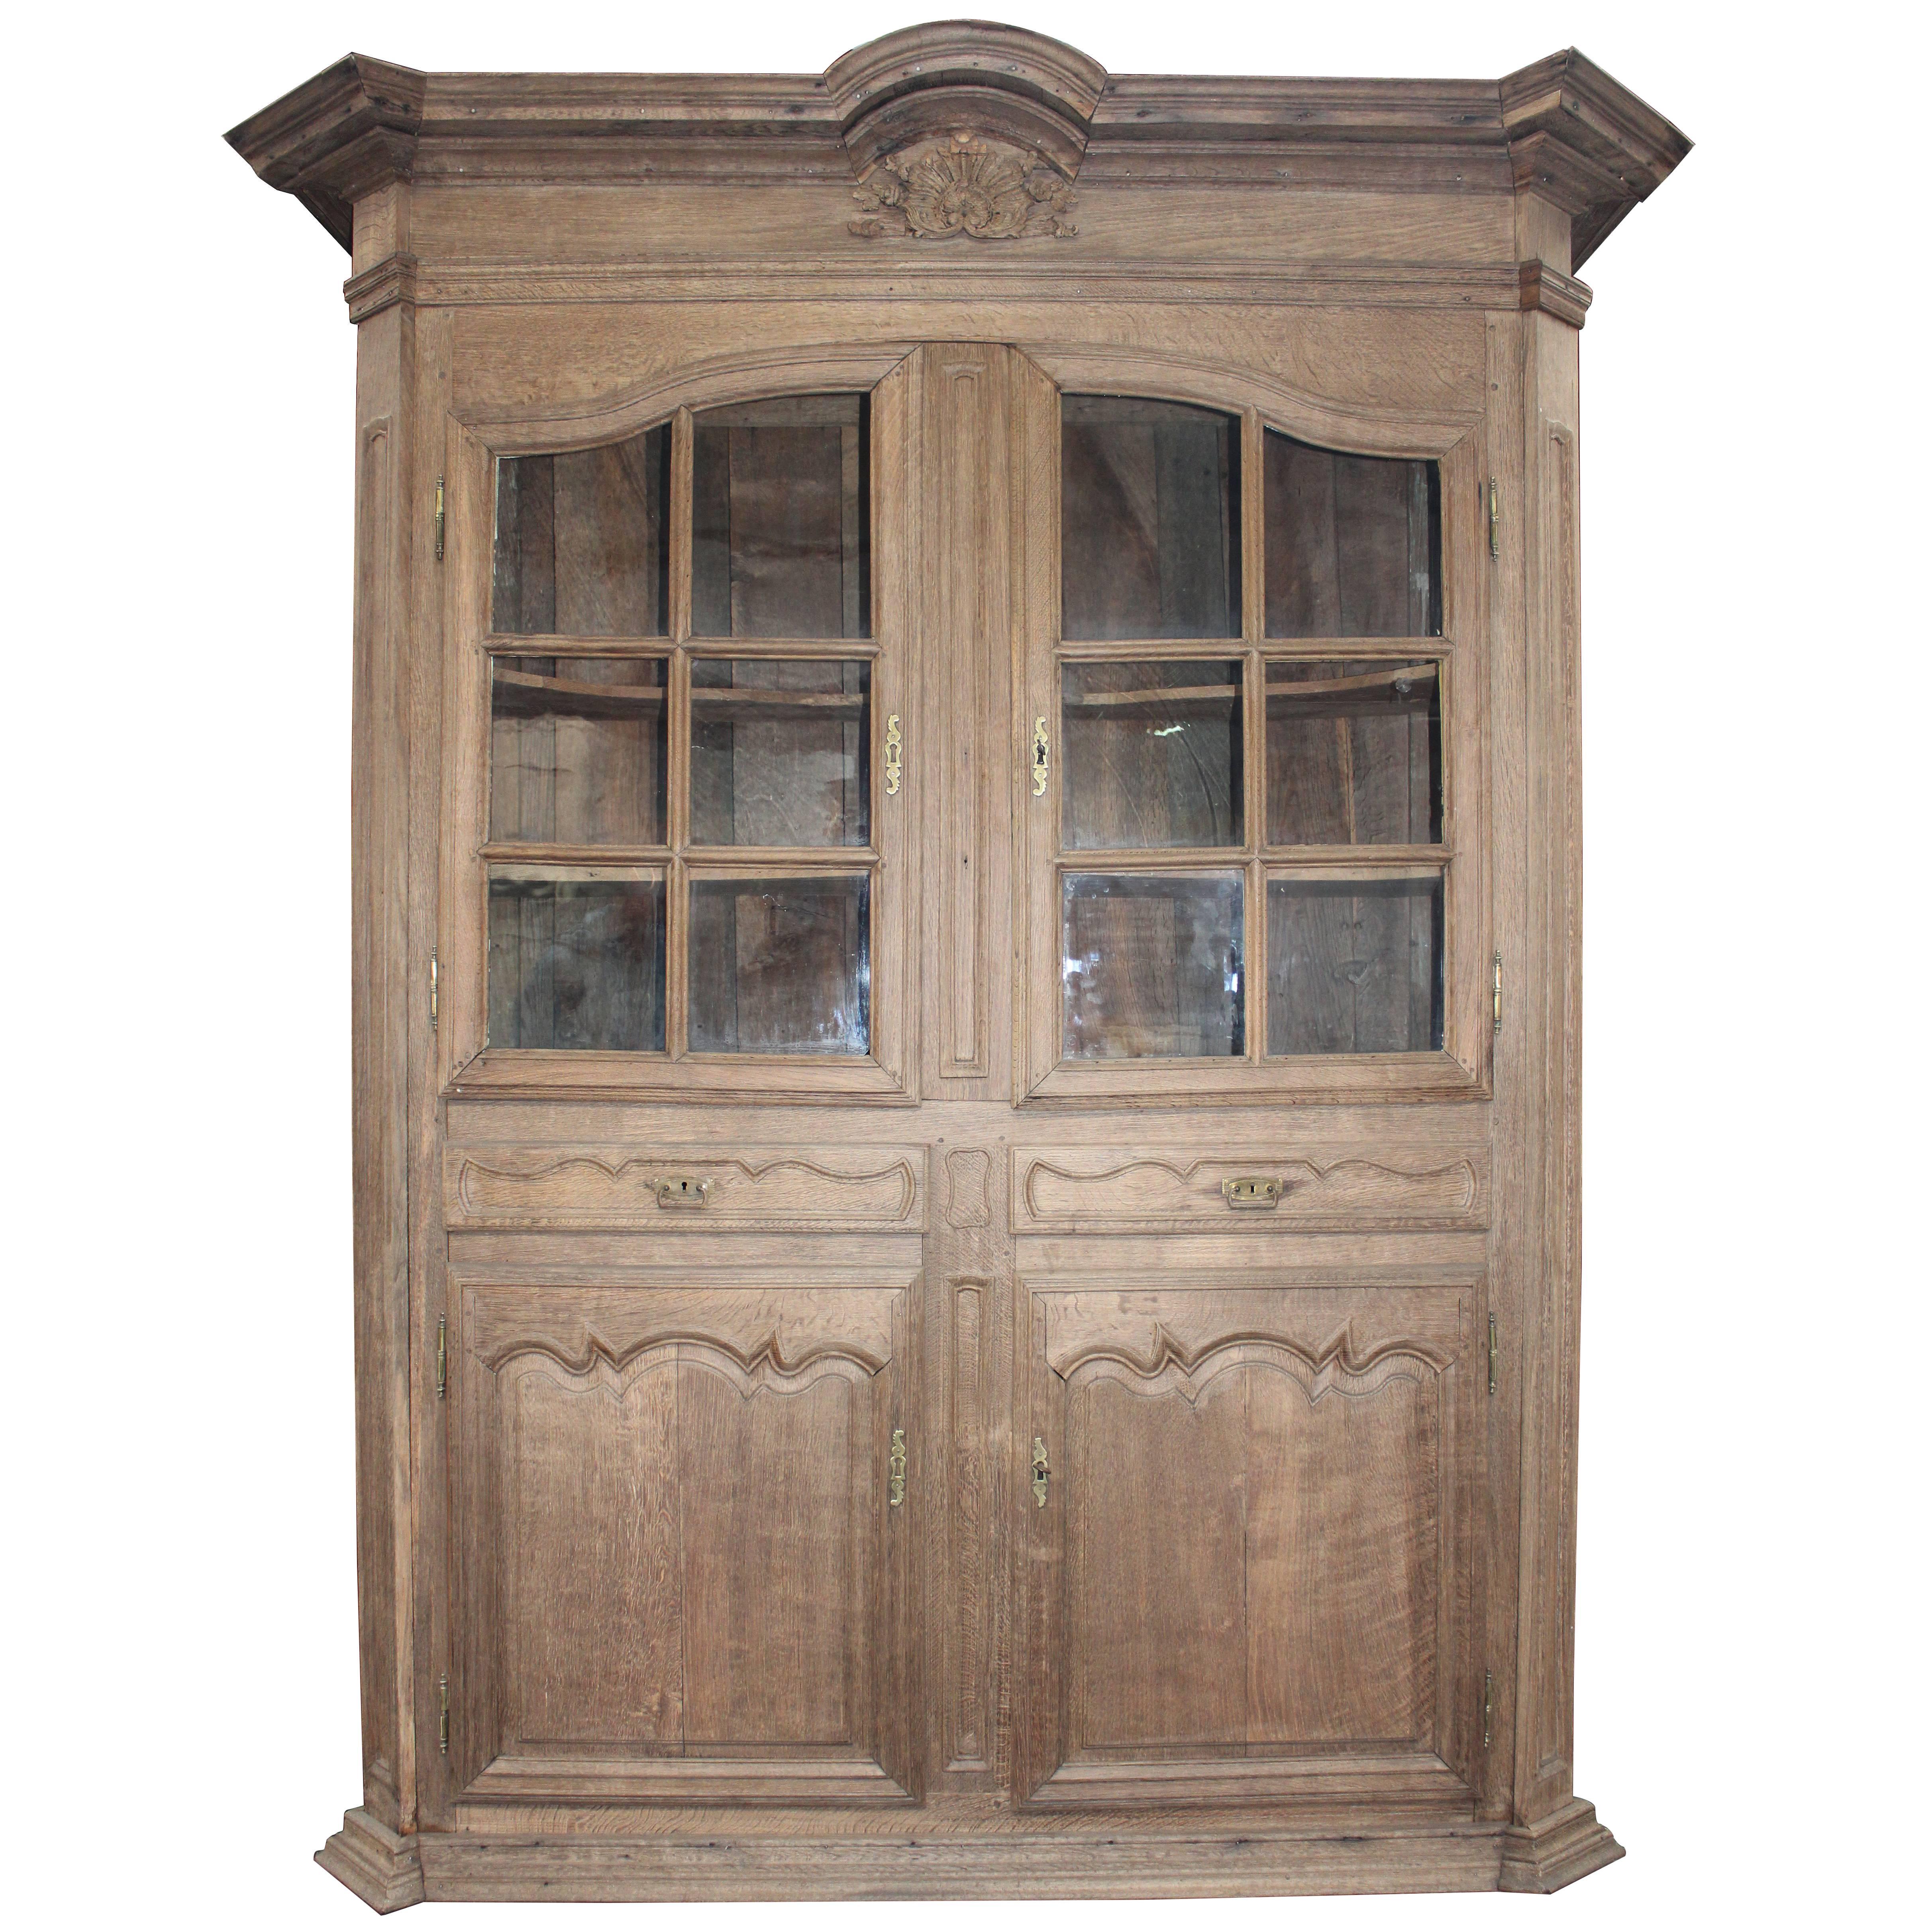 Antique Castle Glass Cabinet, a Real Flemische Piece from 17th Century  For Sale